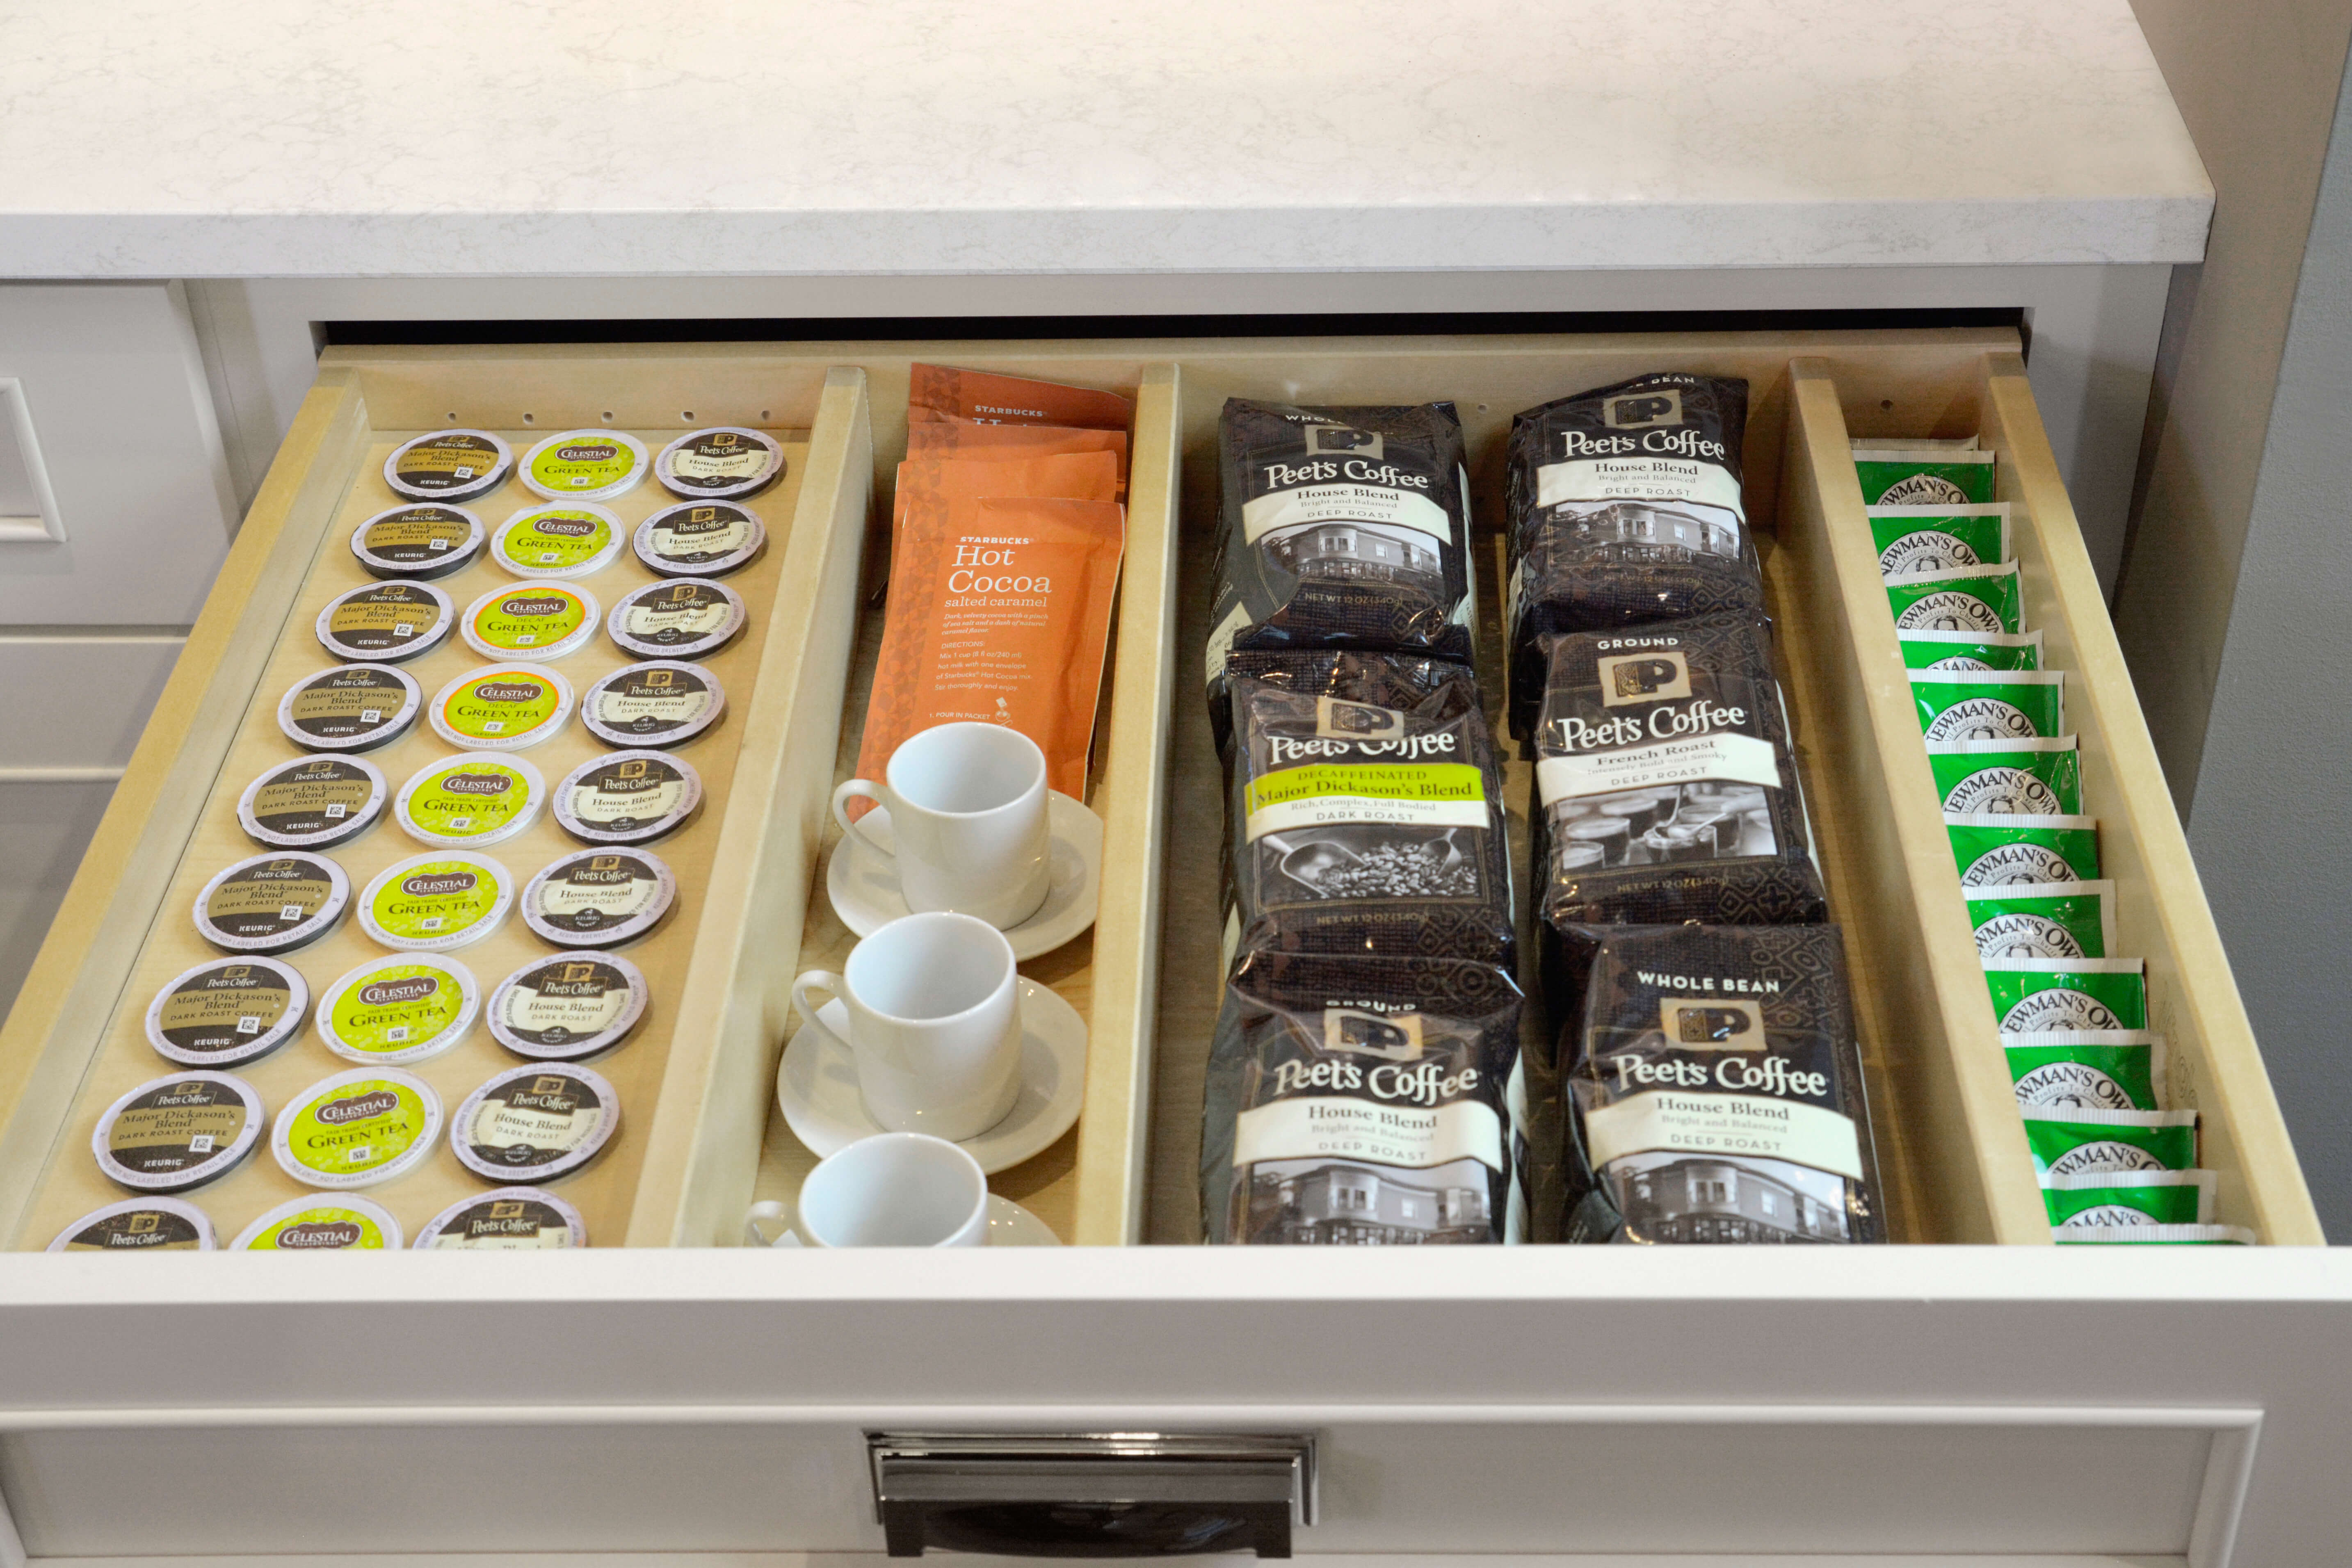 A kitchen drawer with accessories for organizing k-cups and coffee making supplies.